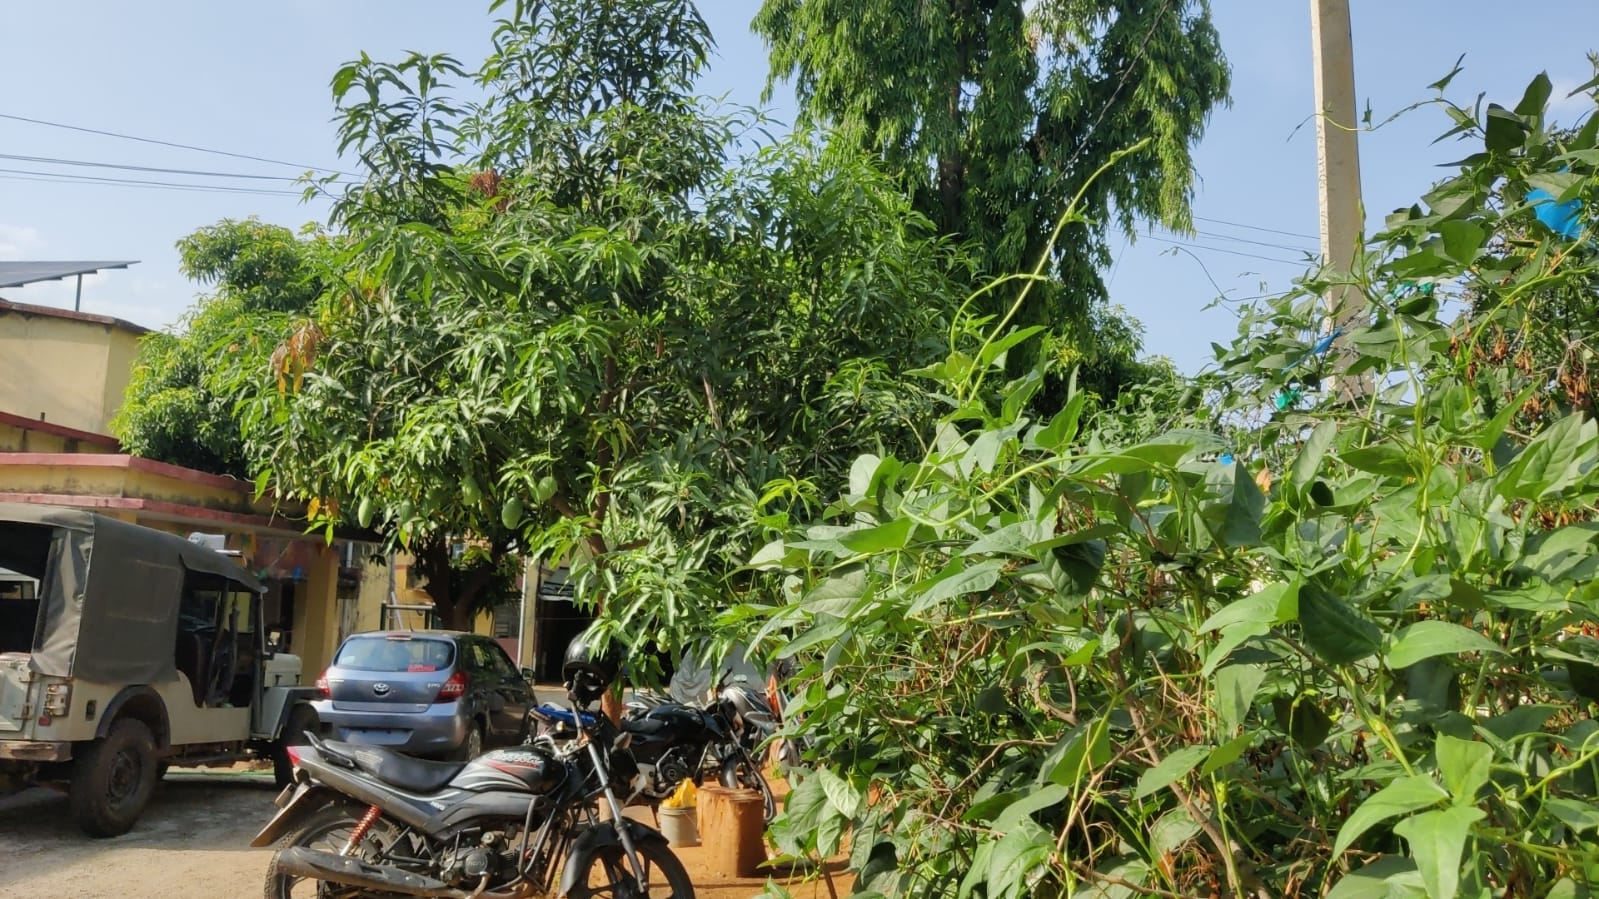 People come to Murhu police station to take selfies with gardening In Khunti